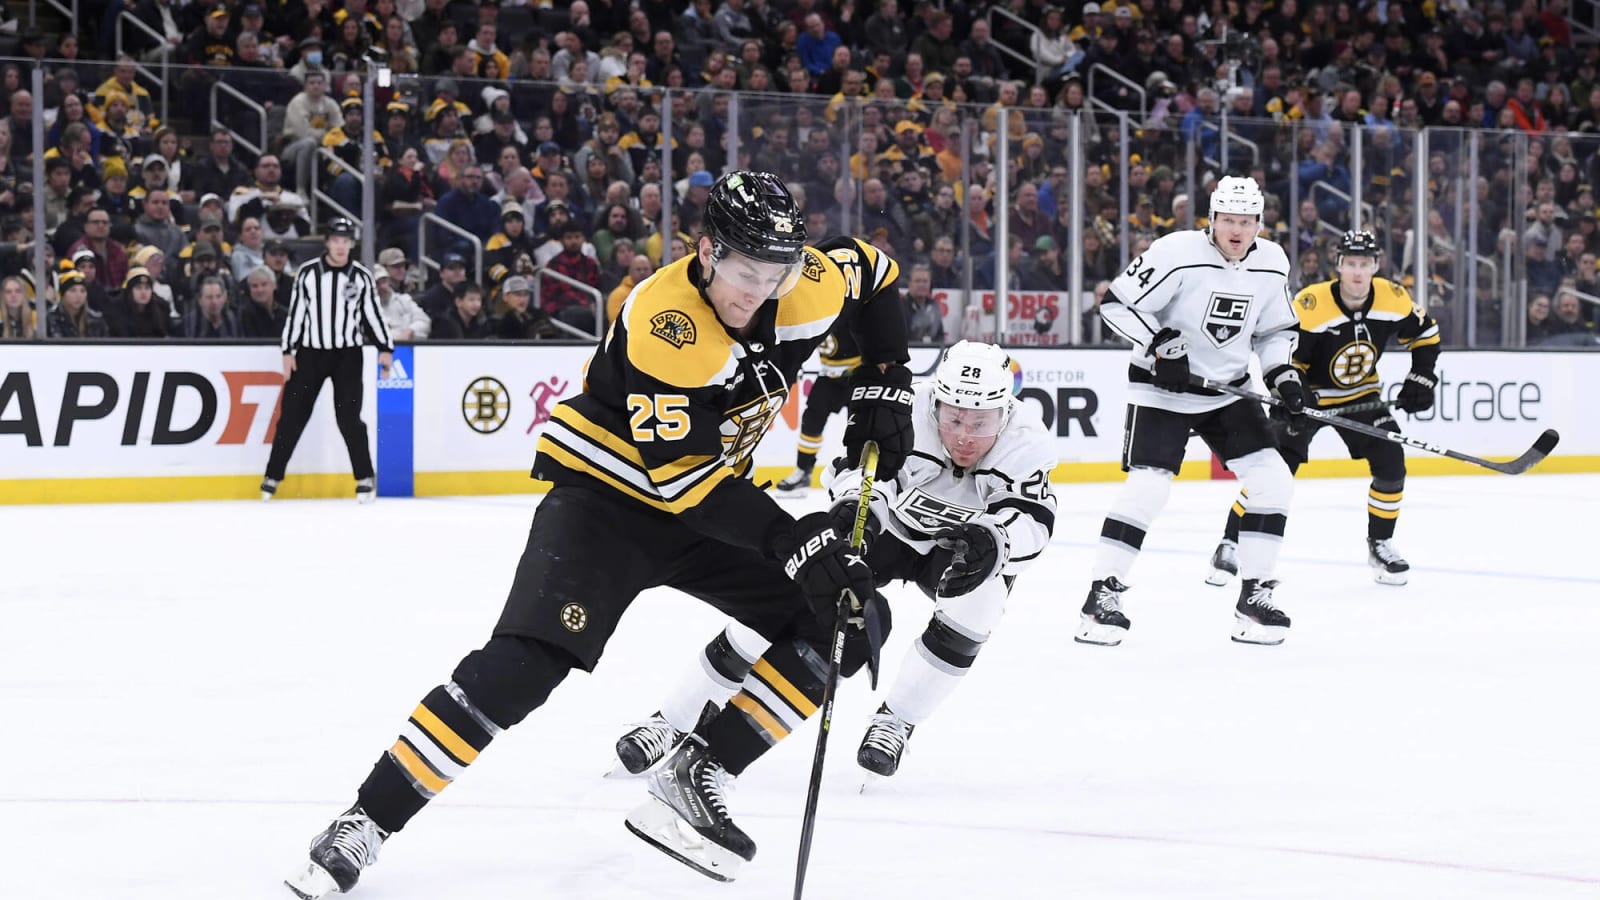 Carlo Cleared To Play For Boston Bruins After Injury Scare